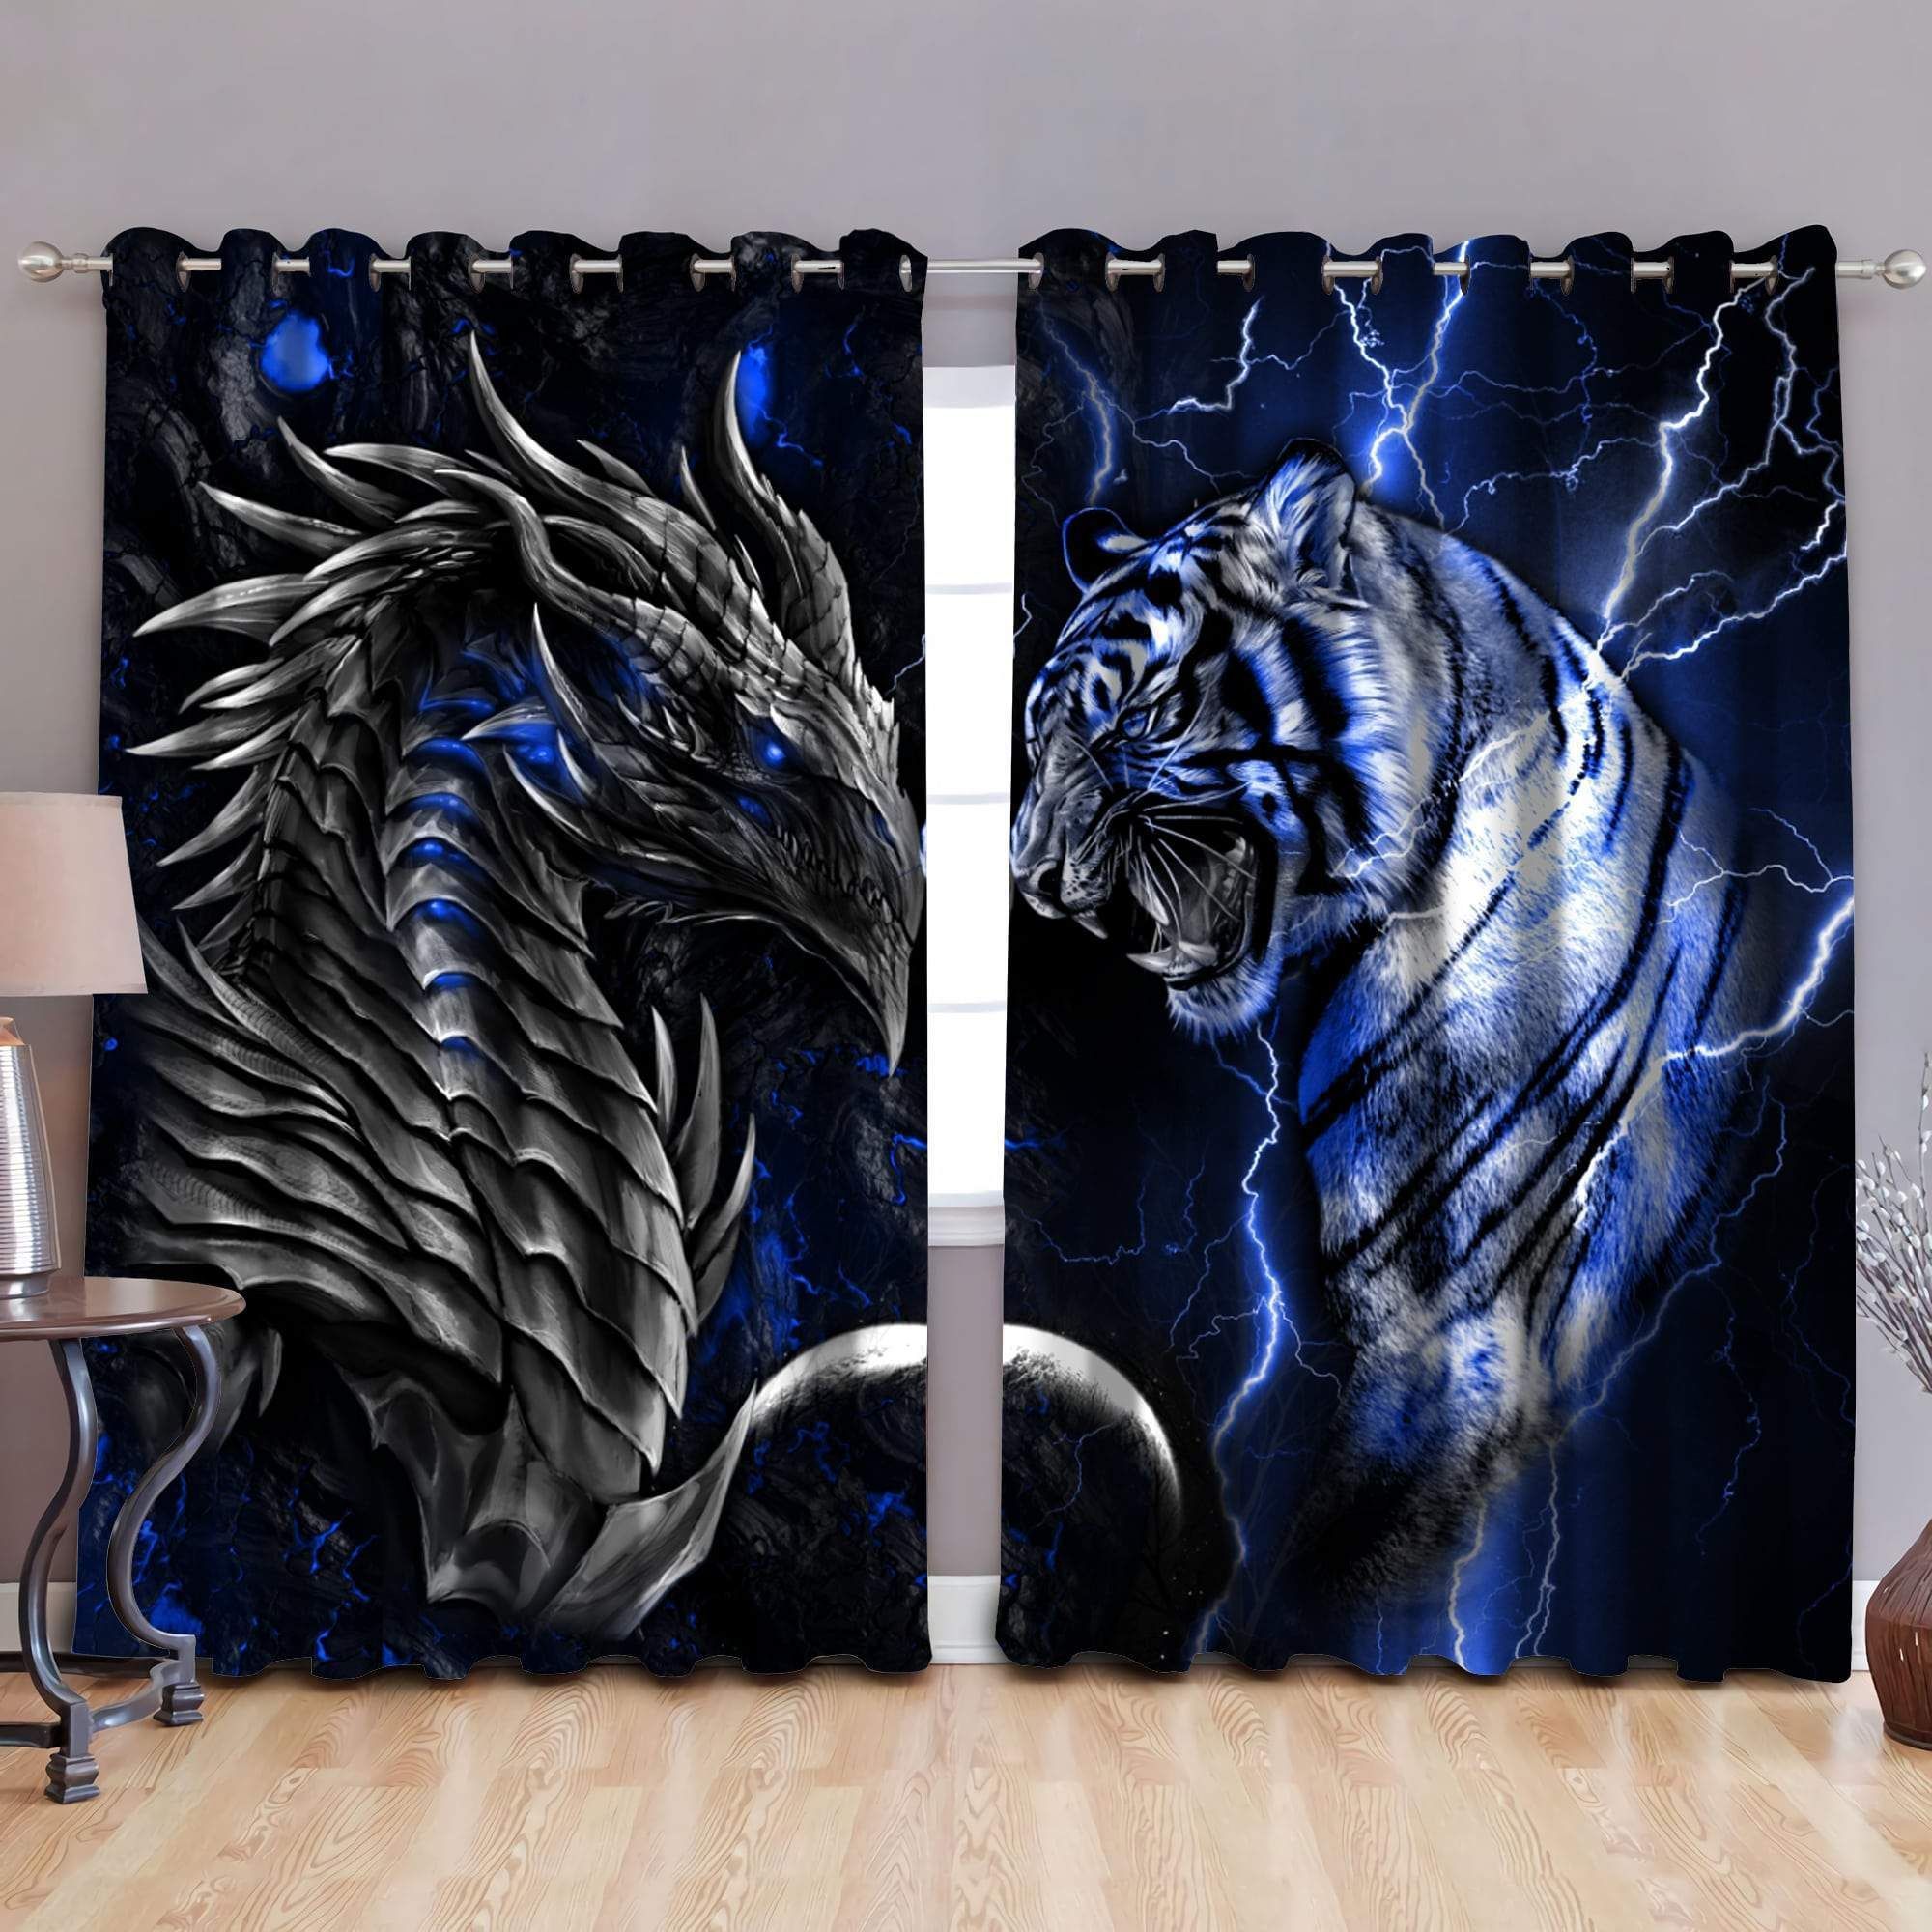 Blue Dragon And Tiger Printed Window Curtains Home Decor - Dragon Blackout Curtains